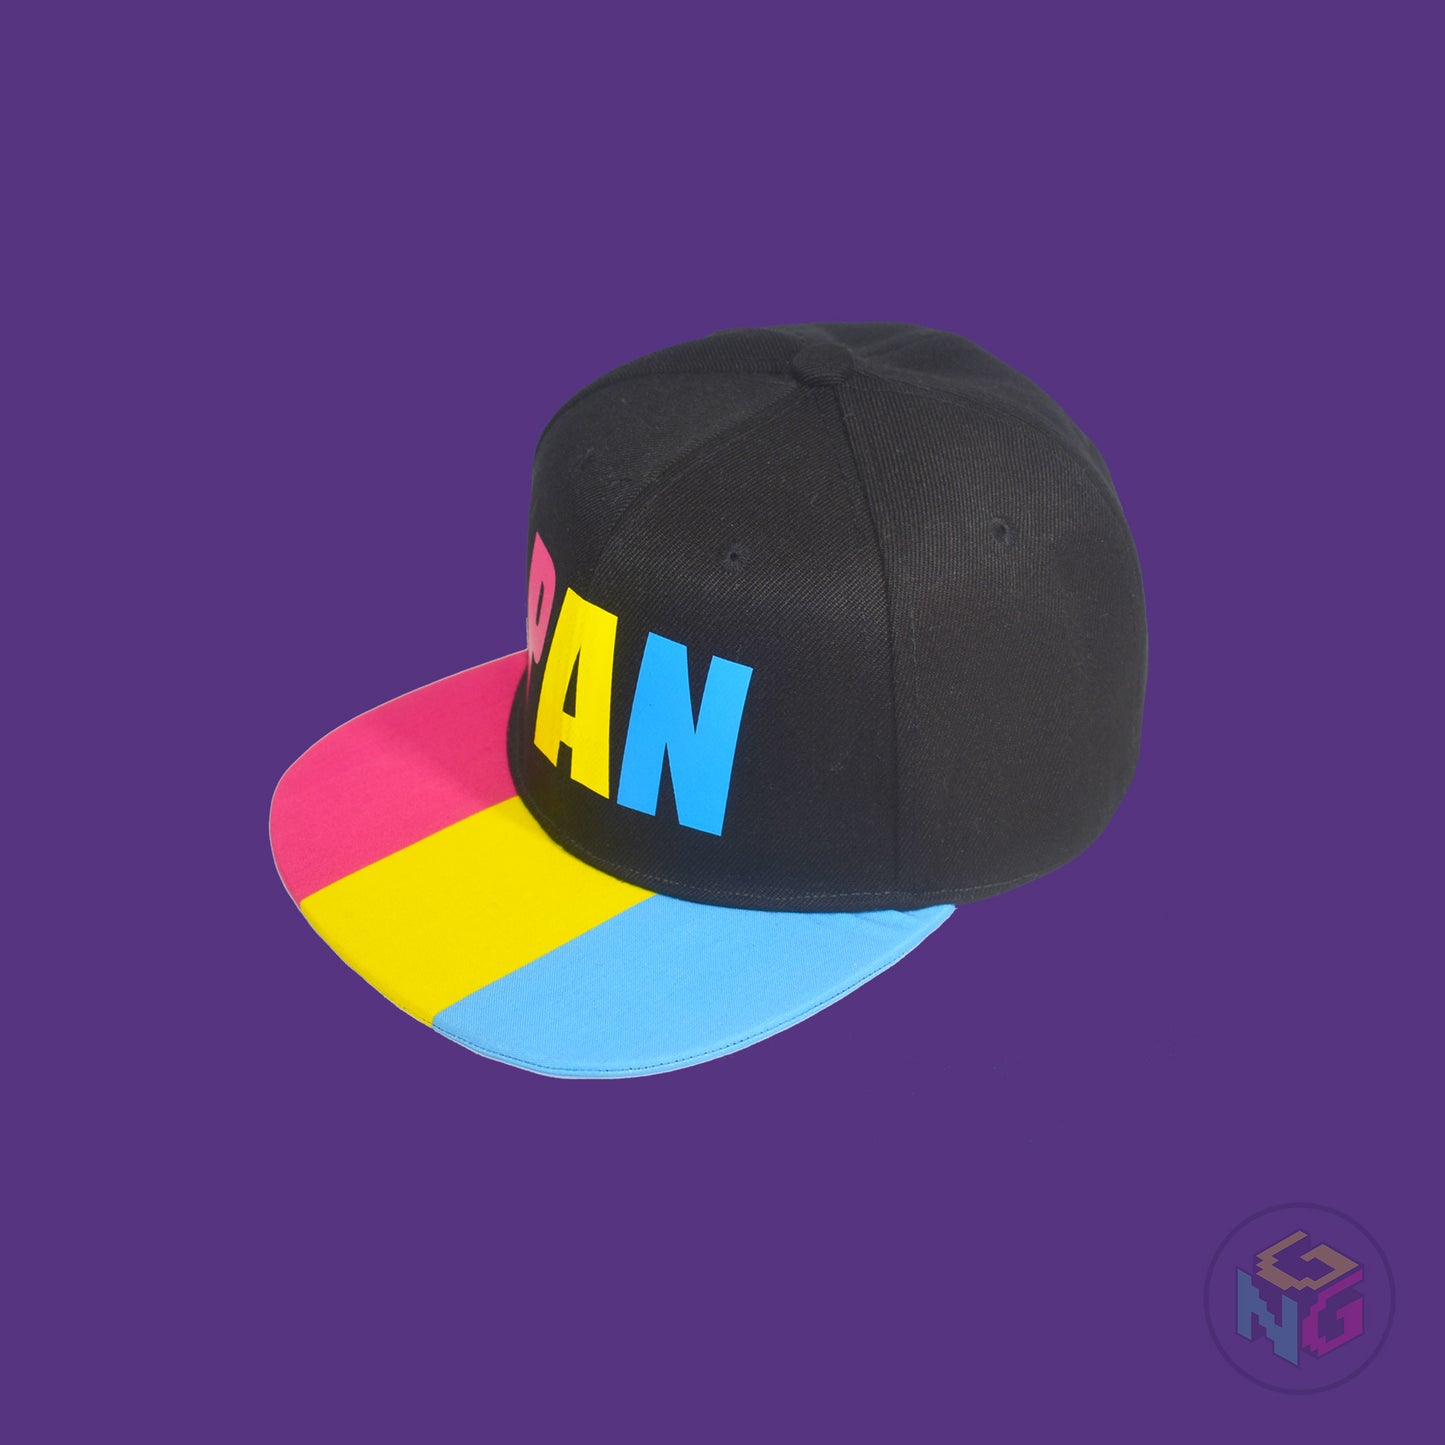 Black flat bill snapback hat. The brim has the pansexual pride flag on both sides and the front of the hat has the word “PAN” in pink, yellow, and blue letters. Front left view